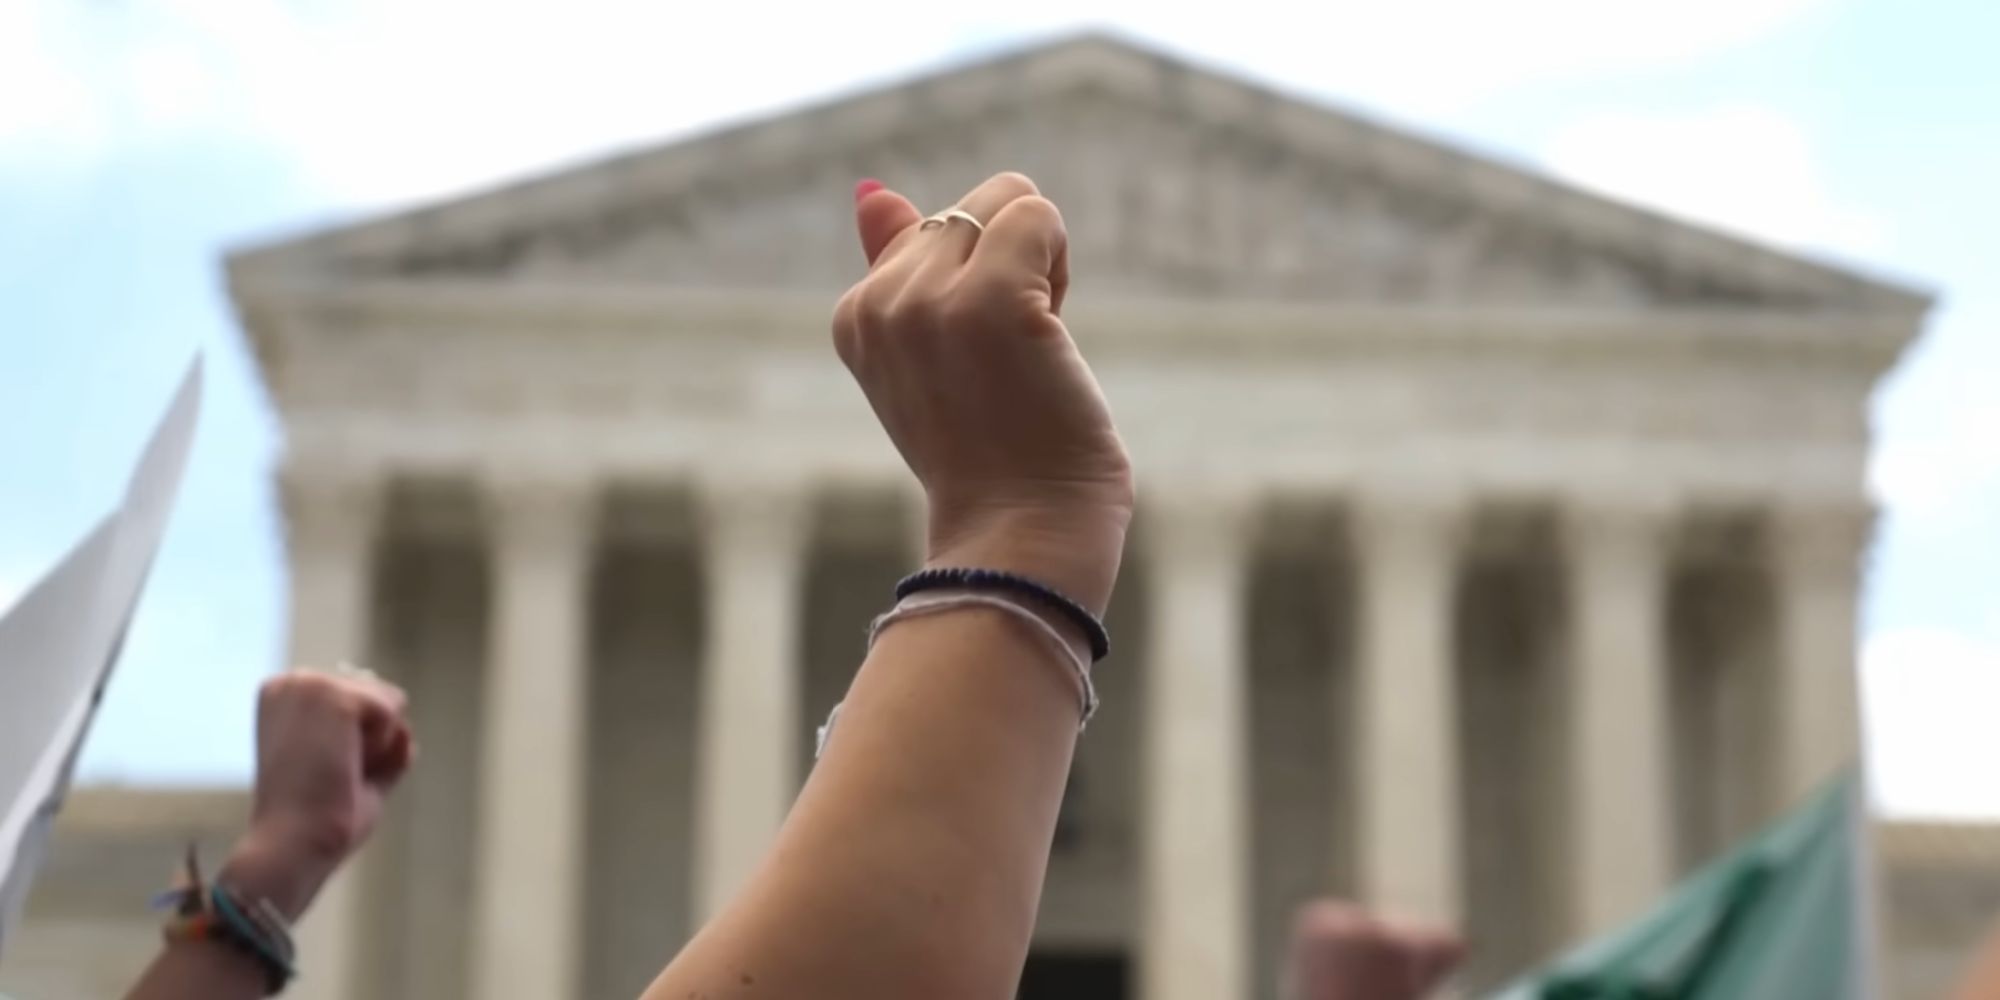 Arms raised in protest against the Supreme Court decision to overturn Roe v. Wade